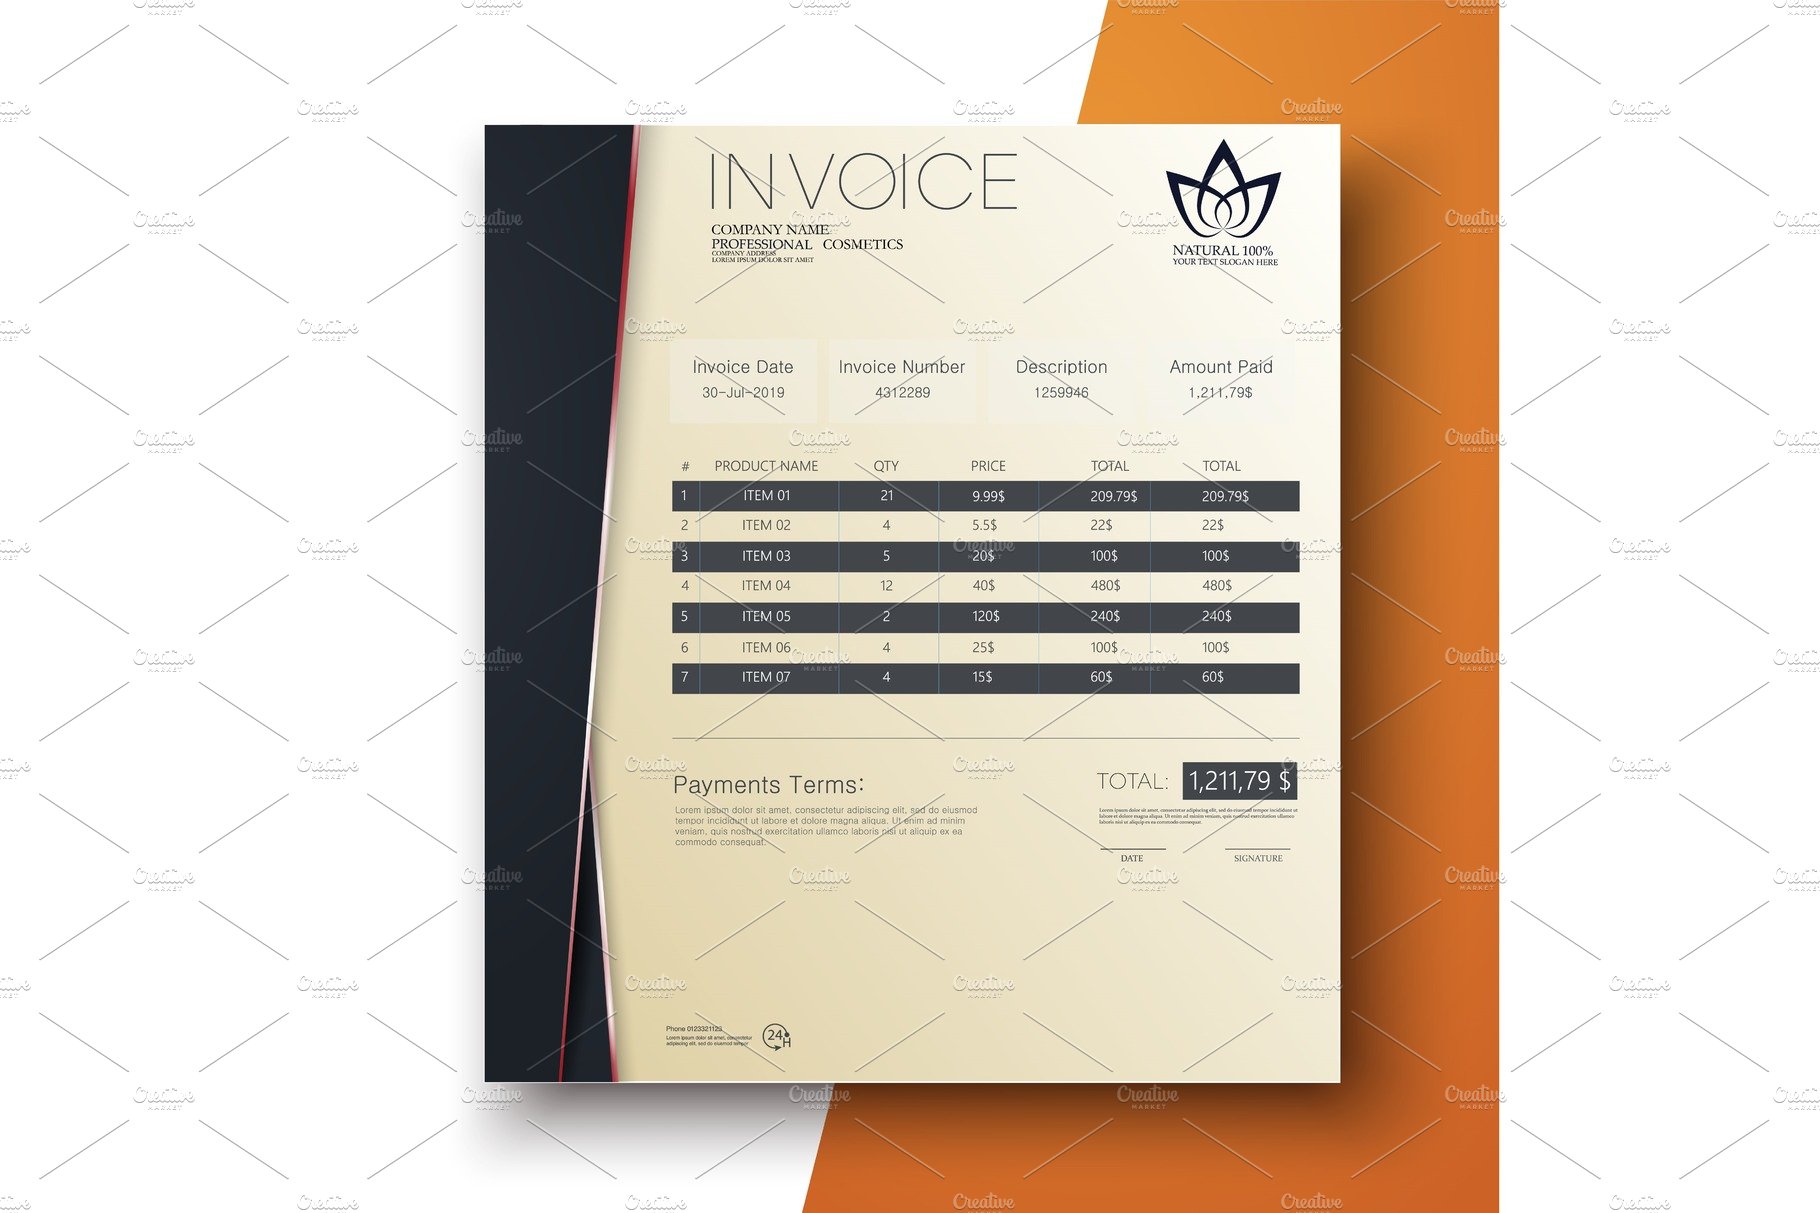 Modern invoice template design in cover image.